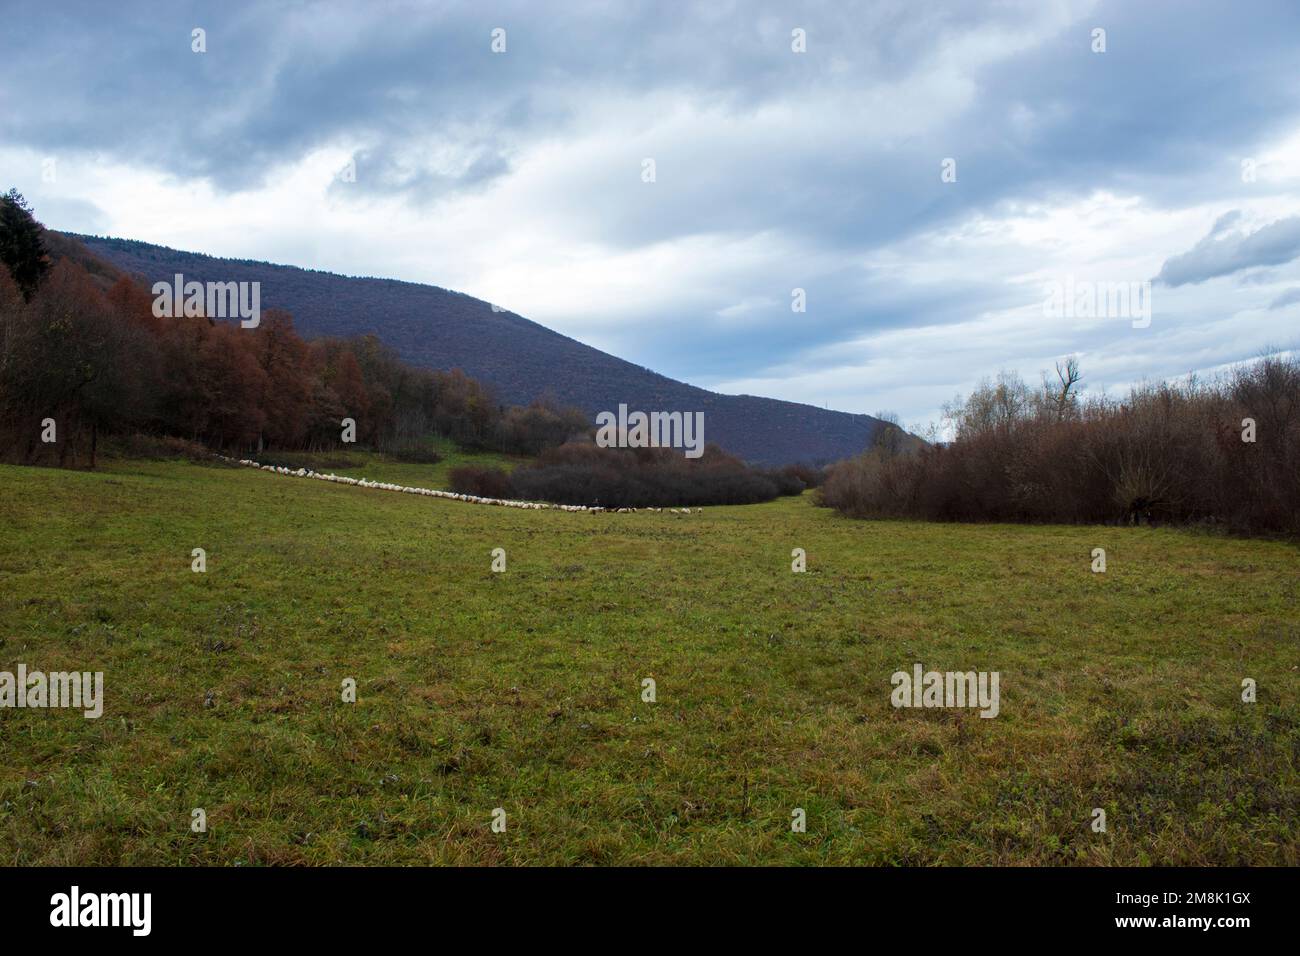 The landscape view of the deciduous trees and hills against a clouded sky in Sarajevo Stock Photo